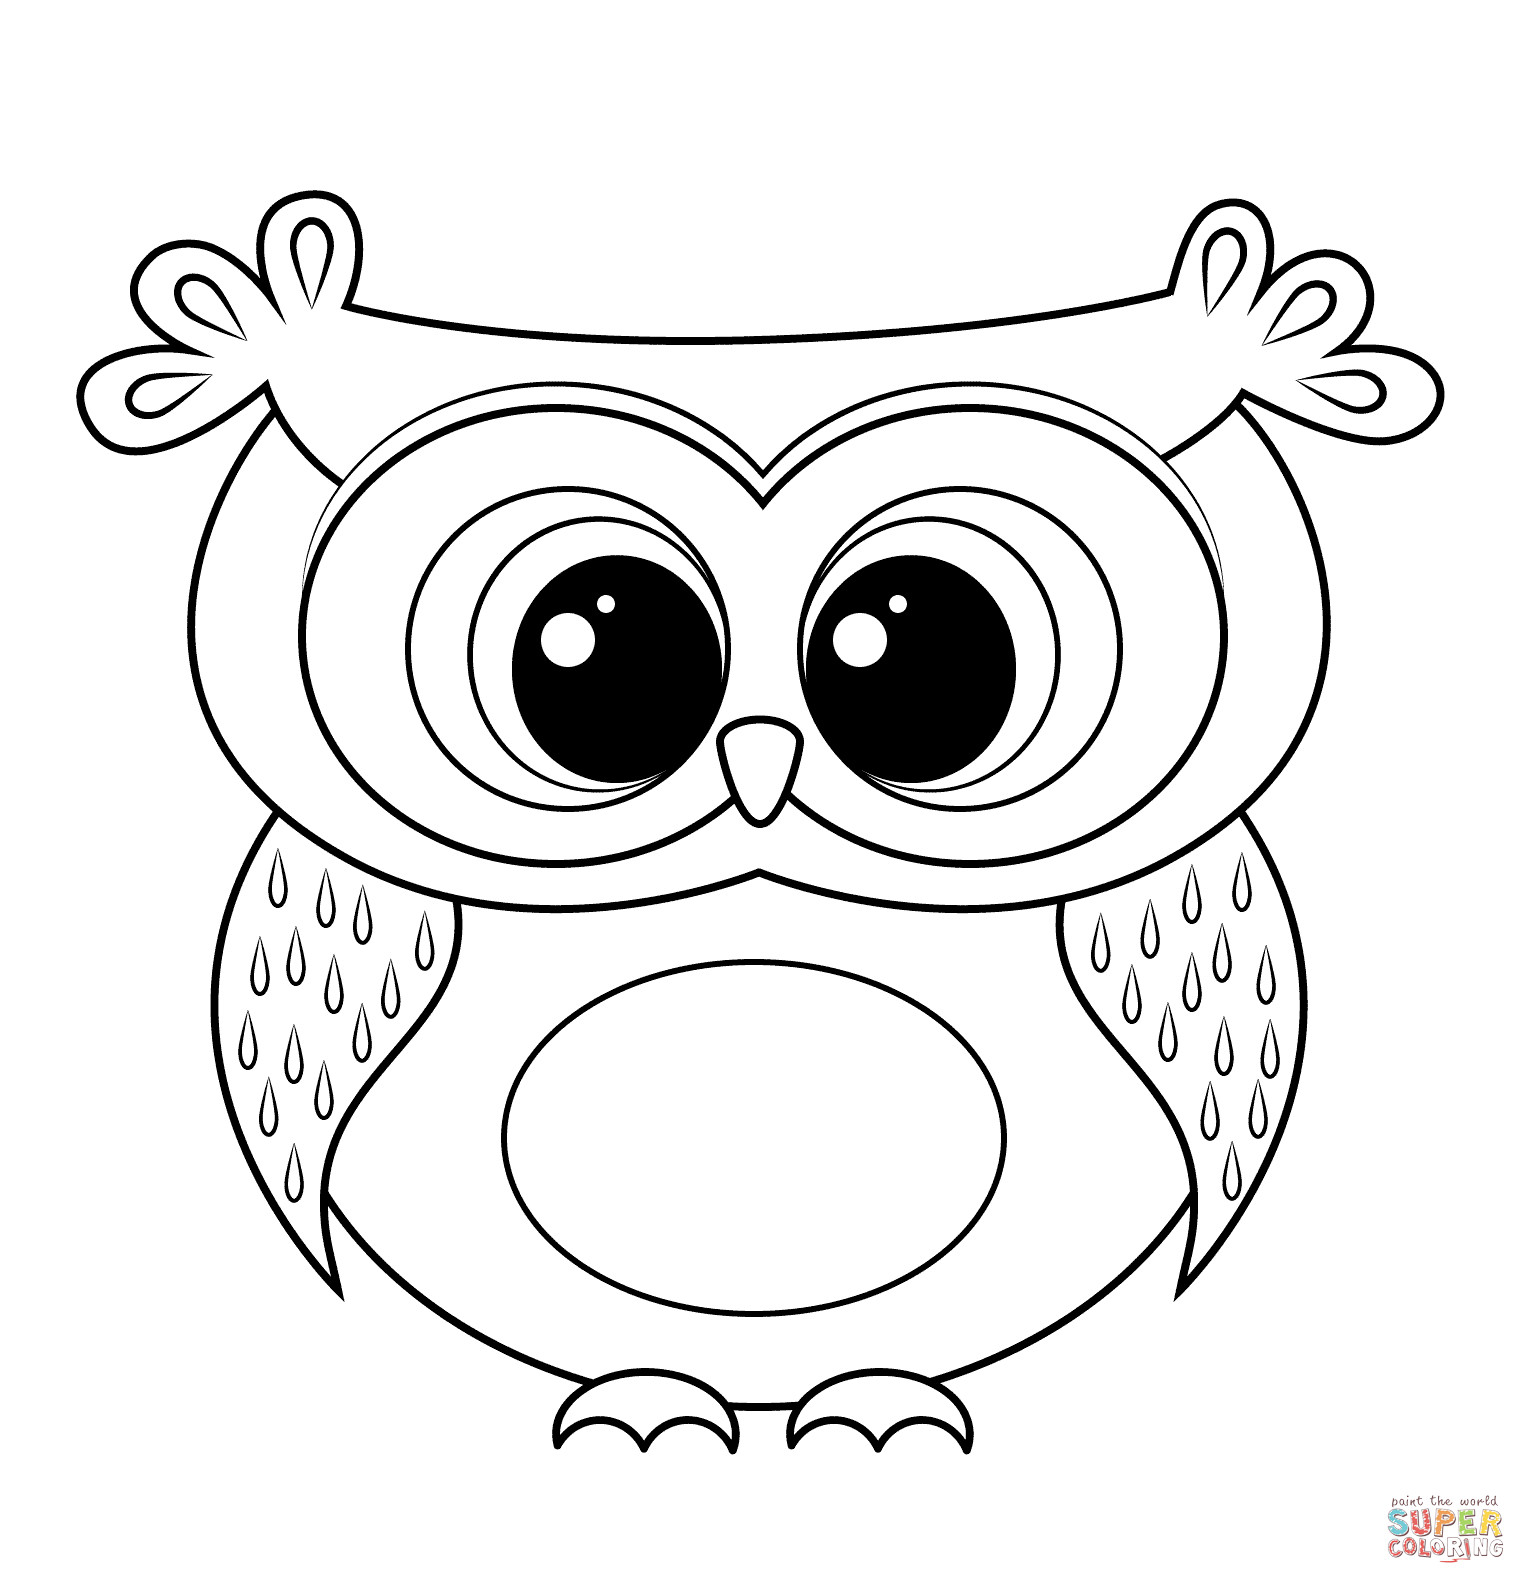 Coloring Pages : Cute Owl Coloring Pages Amazingintable For ...